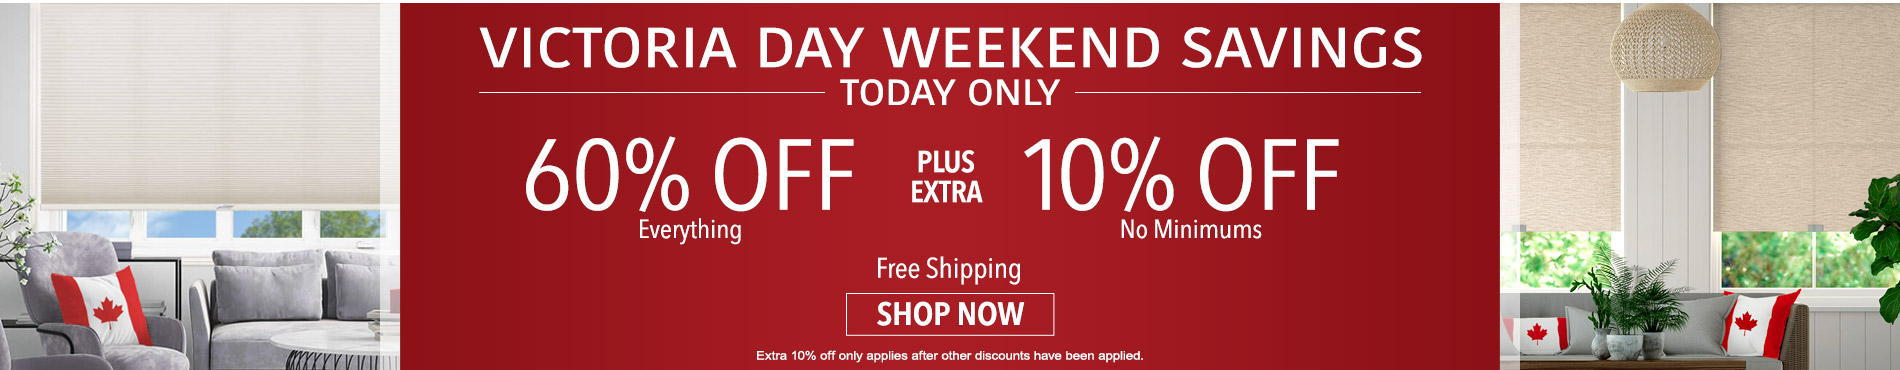 60% off everything + 10% off